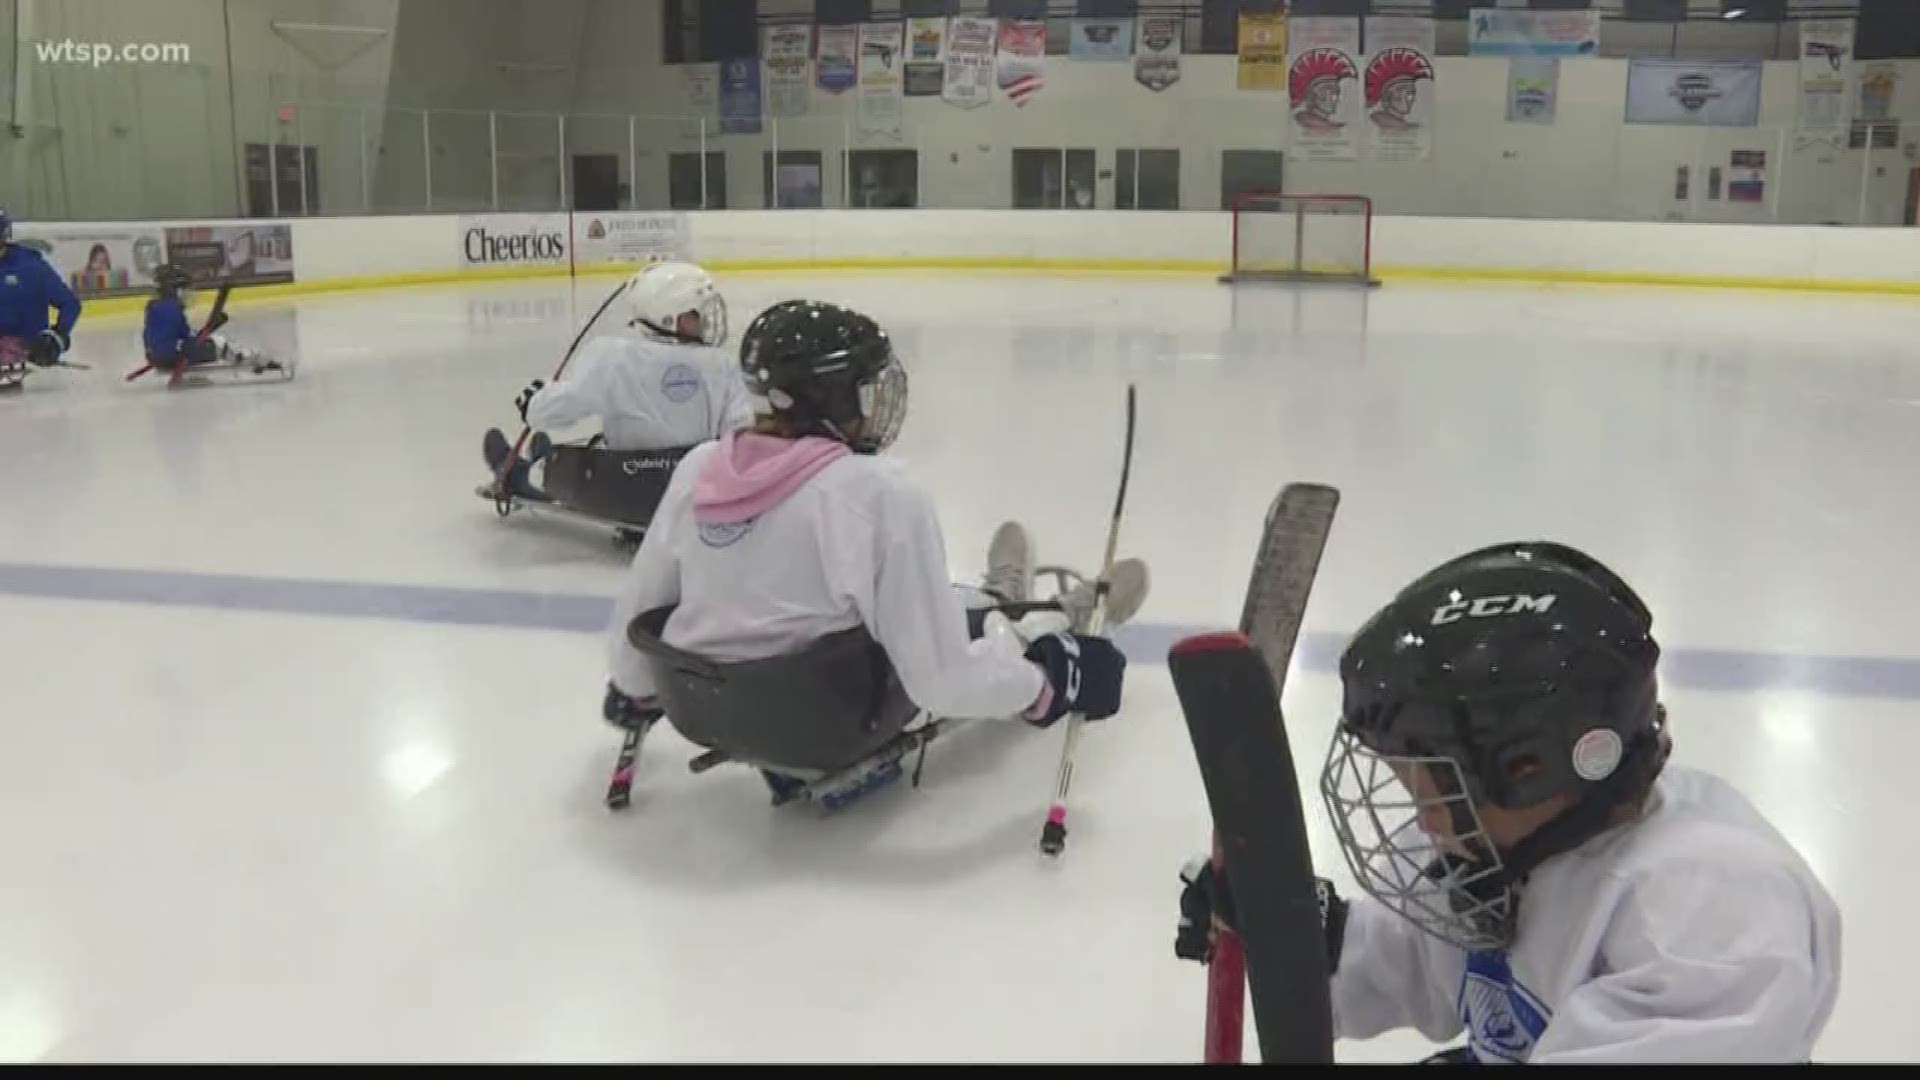 Together they helped children in wheelchairs play some sled hockey.
They got to dress up in the gear, find a sled and have some fun.
And one lucky kid was surprised with a Lightning-themed hand trike.